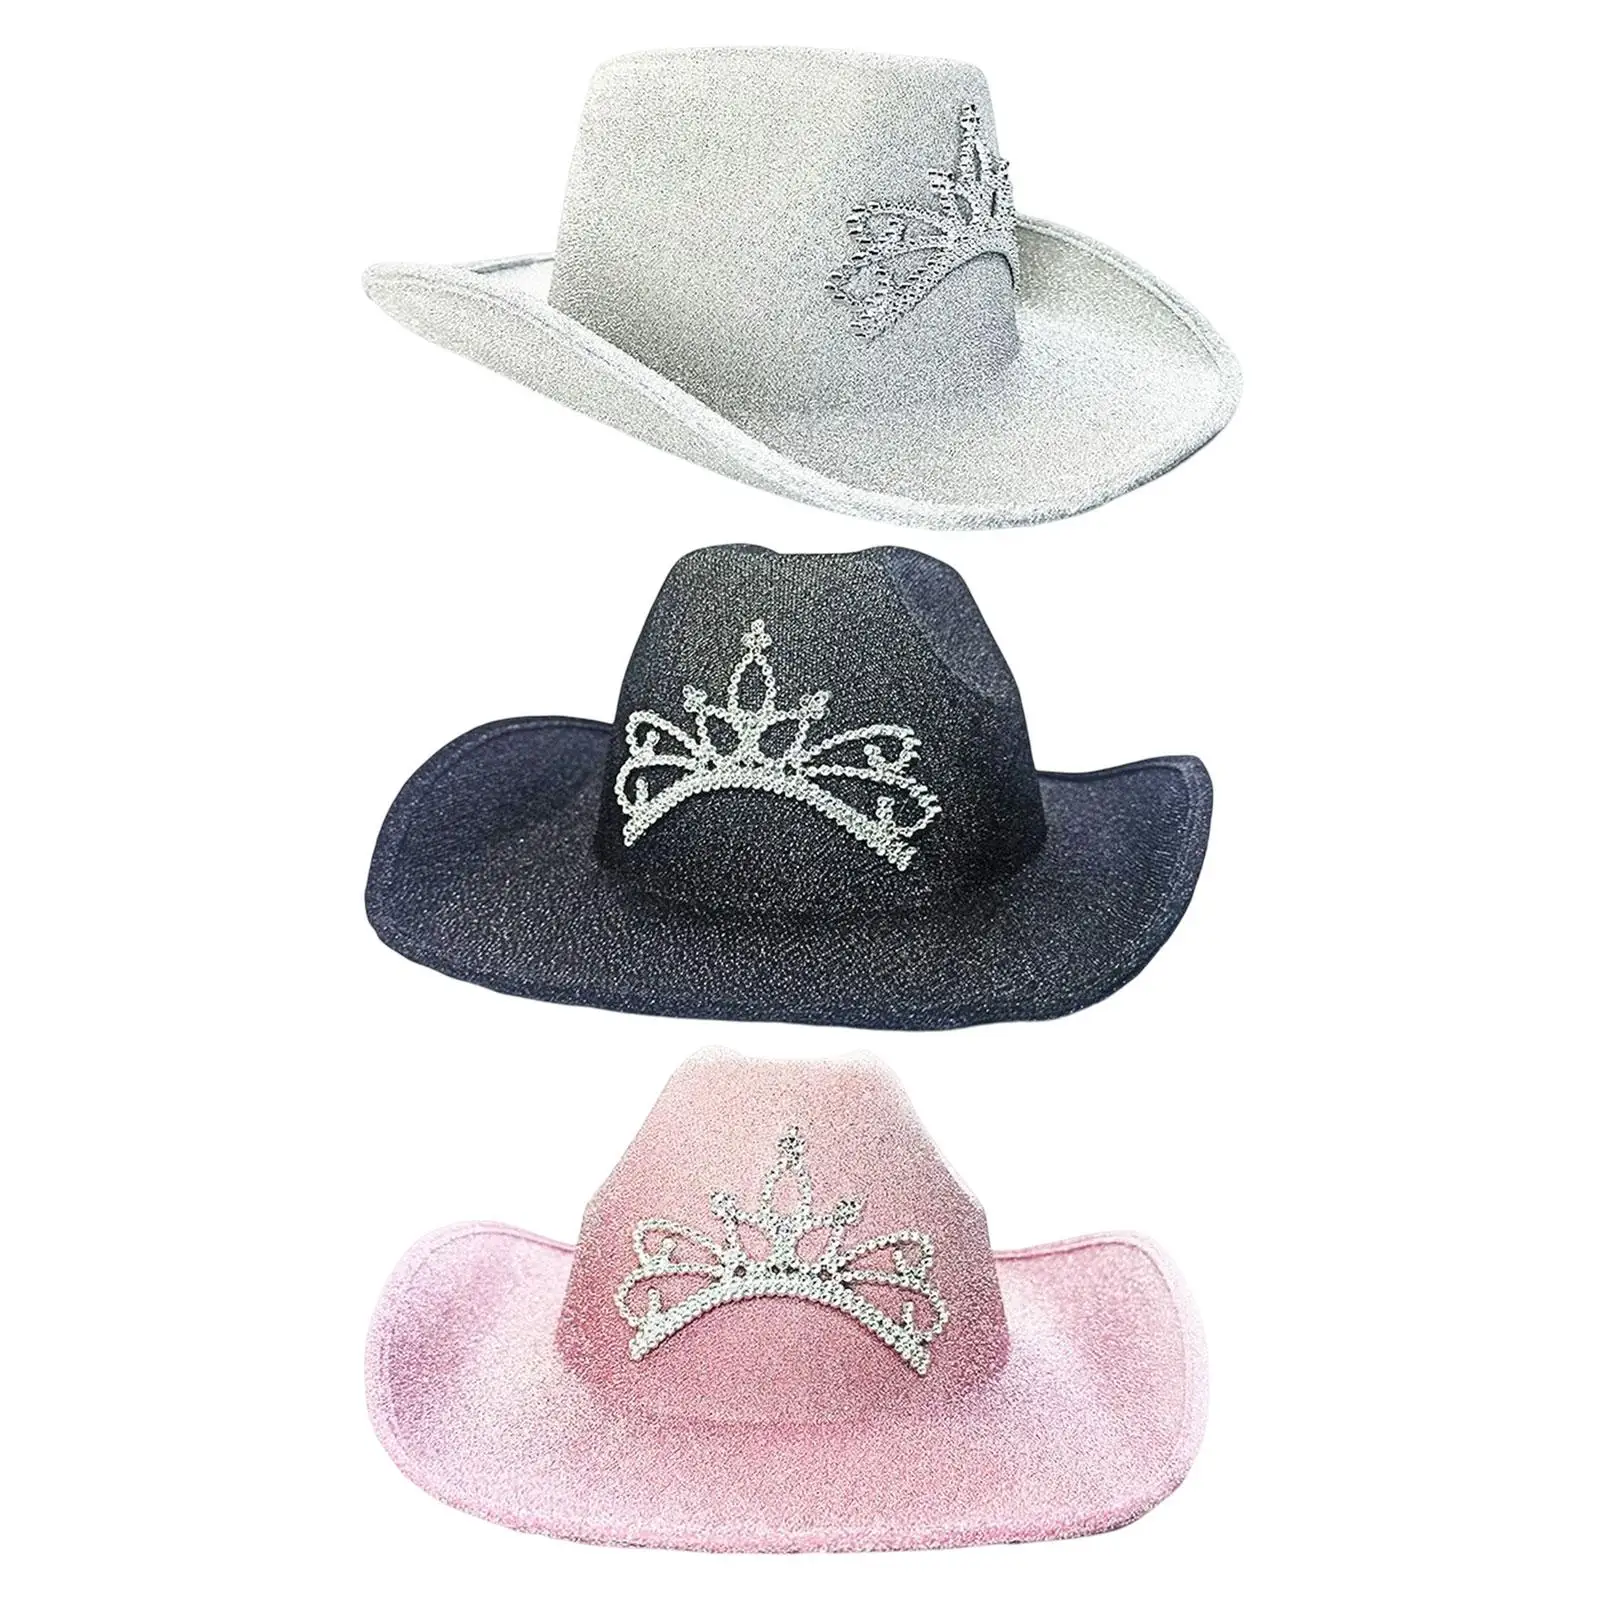 Fashion Cowboy Hat Western Style Cap Retro Style Costume Clothing Cowgirl for Female